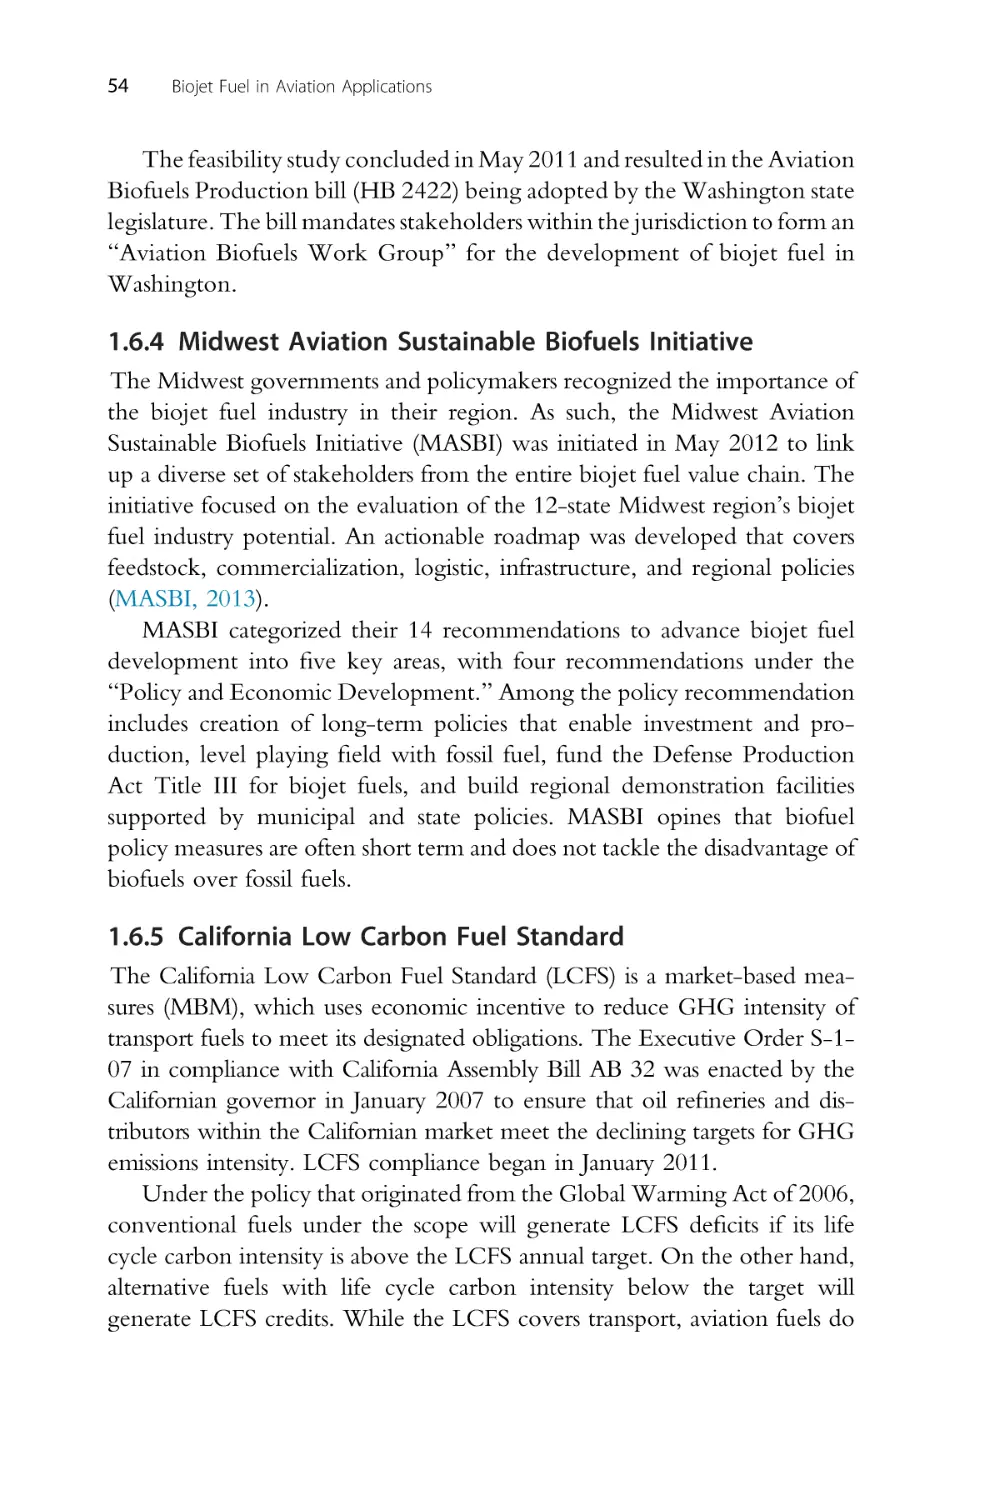 1.6.4 Midwest Aviation Sustainable Biofuels Initiative
1.6.5 California Low Carbon Fuel Standard